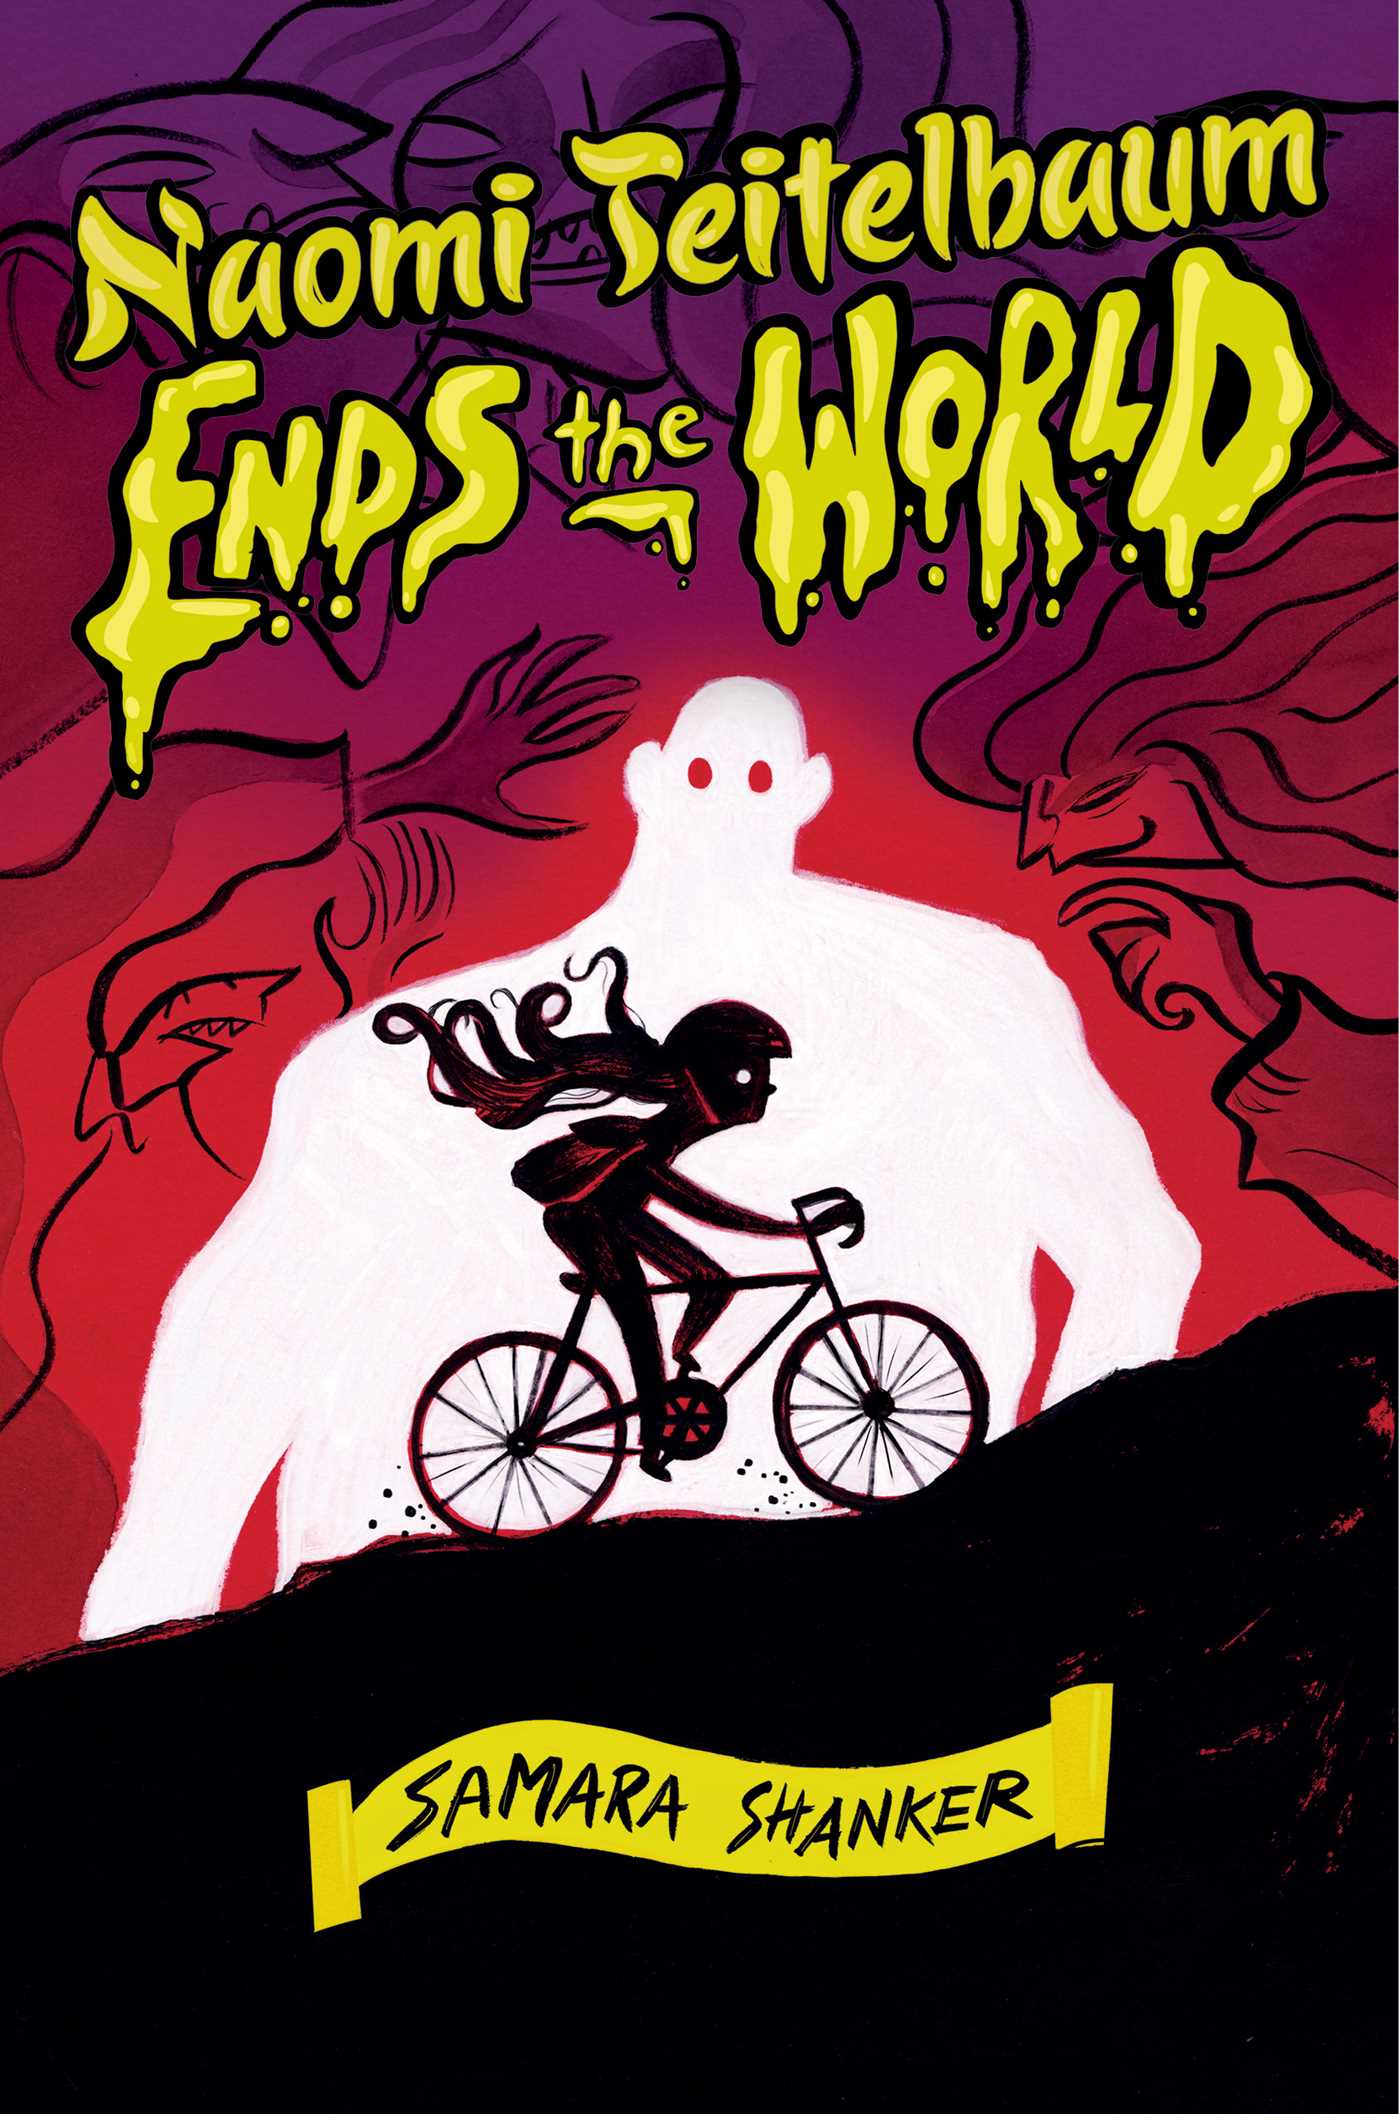 Cover Image for "Naomi Teitelbaum Ends the World"